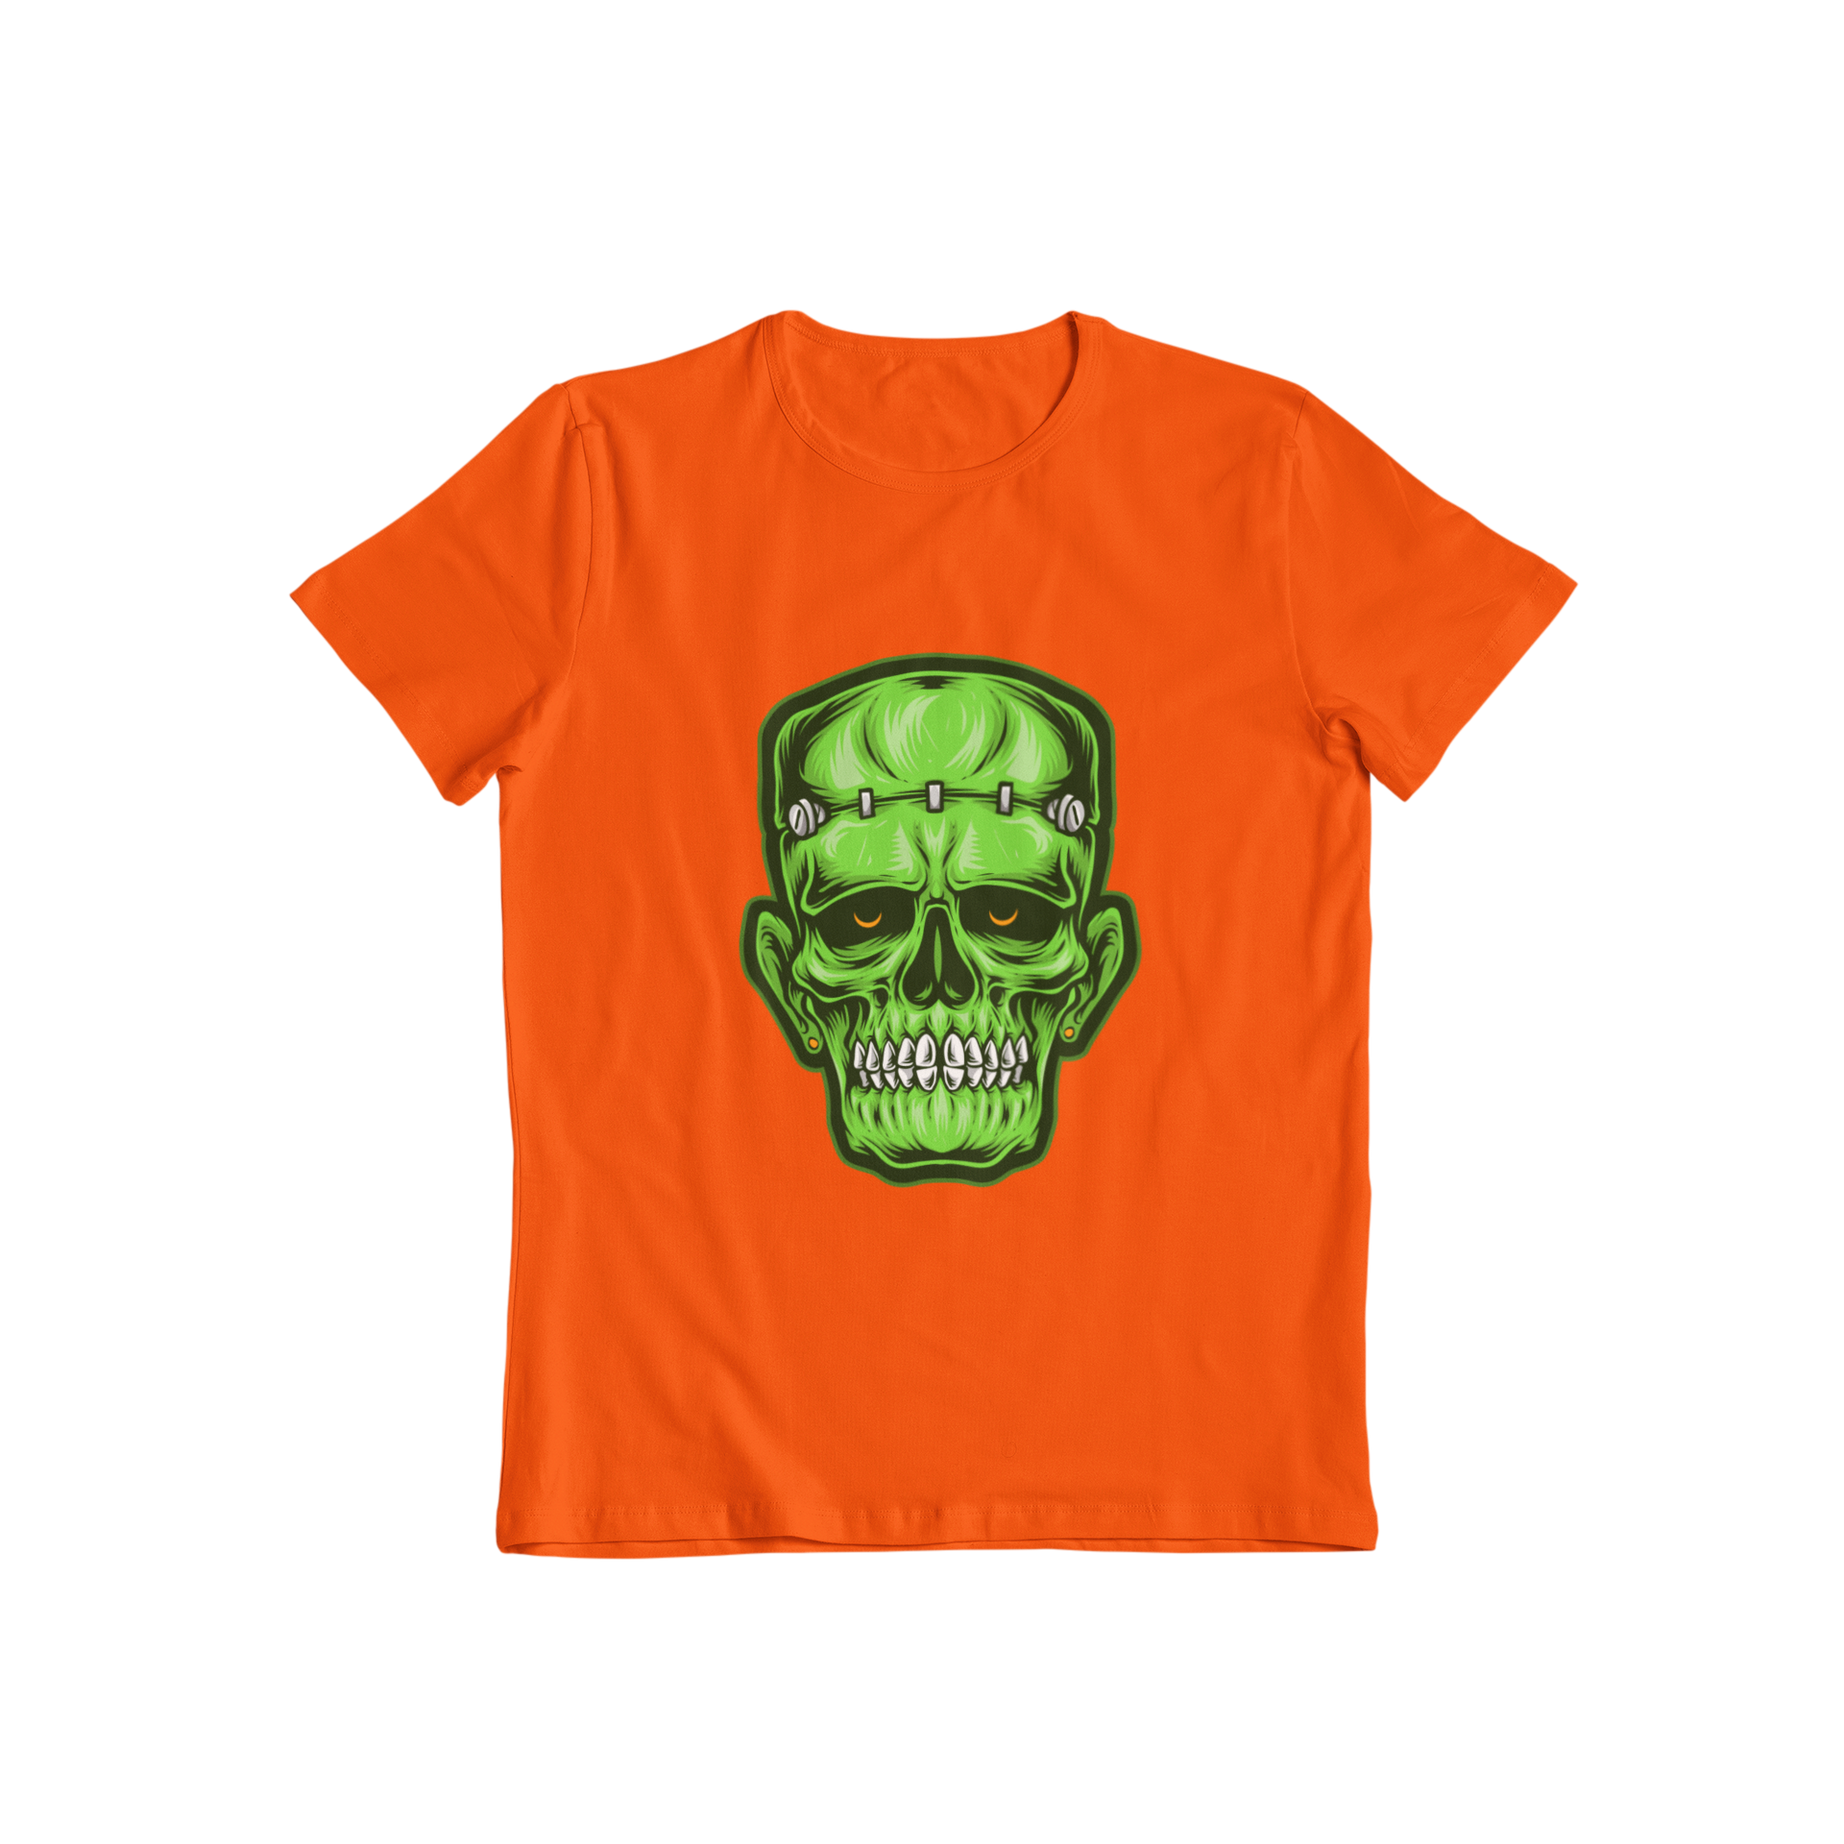 Looking for a unique Halloween t-shirt? Teevolution has got you covered with our Frankenstein face t-shirt. Get ready to scare your friends with our high-quality graphic t-shirts that are both stylish and spooky!